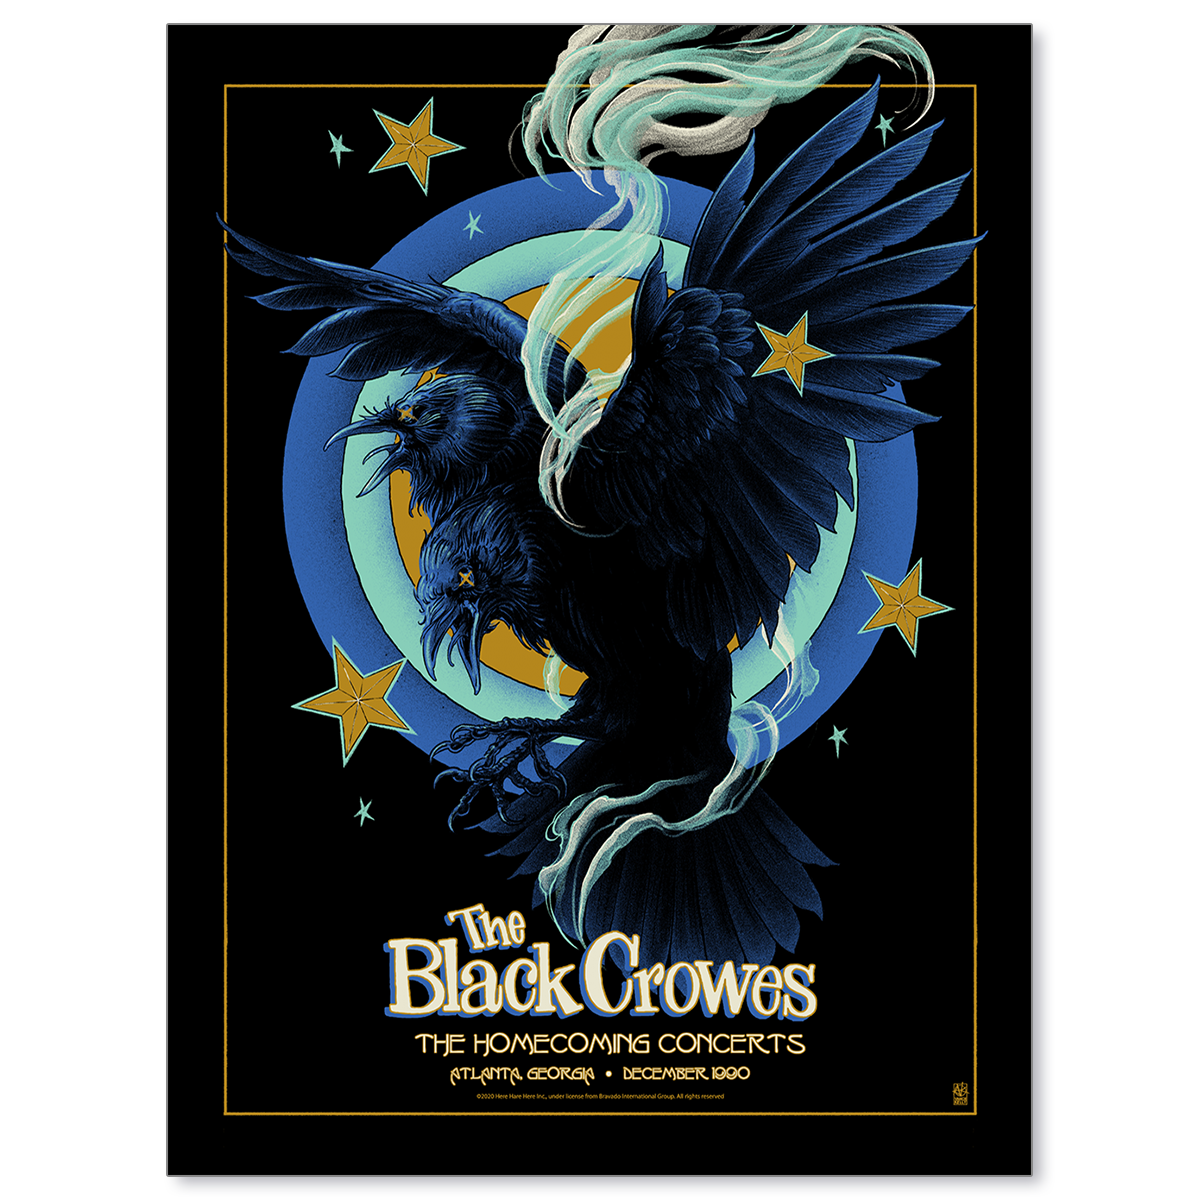 The Black Crowes Homecoming Concerts (Main Edition)